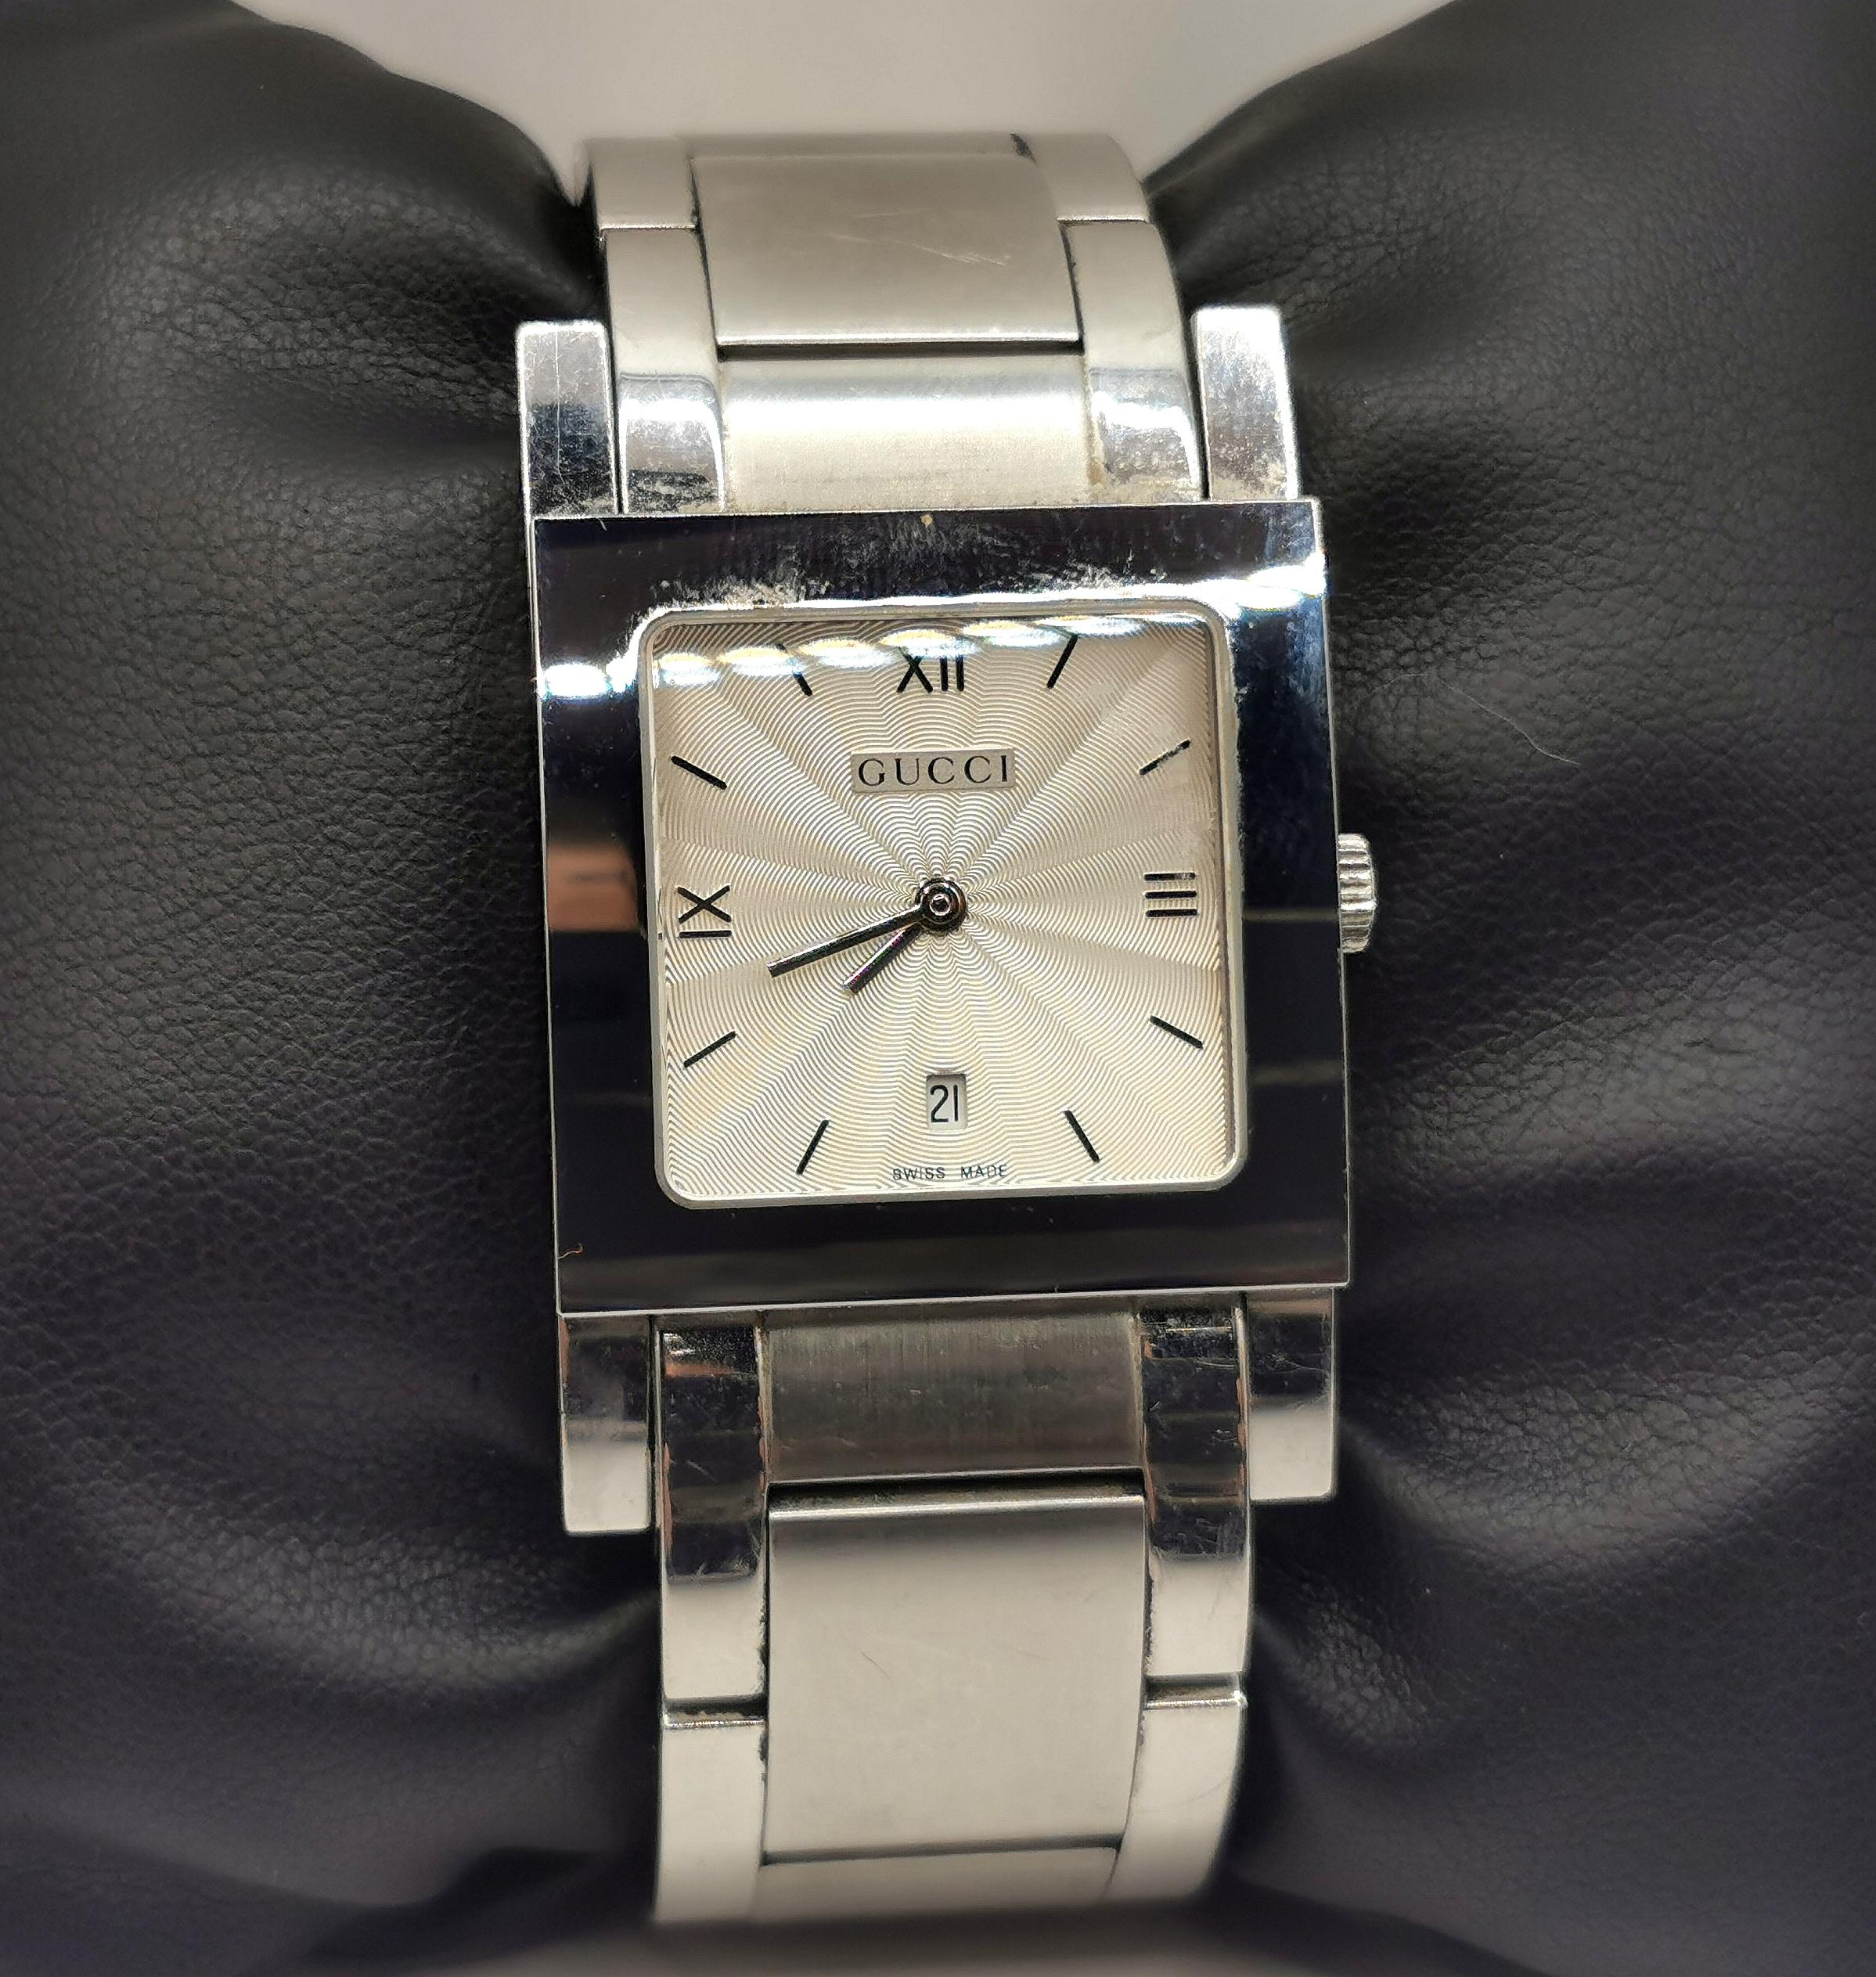 A stylish Gucci 7900M.1 stainless steel watch.

This is a bracelet strap watch with a nice chunky stainless steel bracelet.

The case is stainless steel with a champagne silver dial, silver hands and black logo with roman numerals, the watch has a